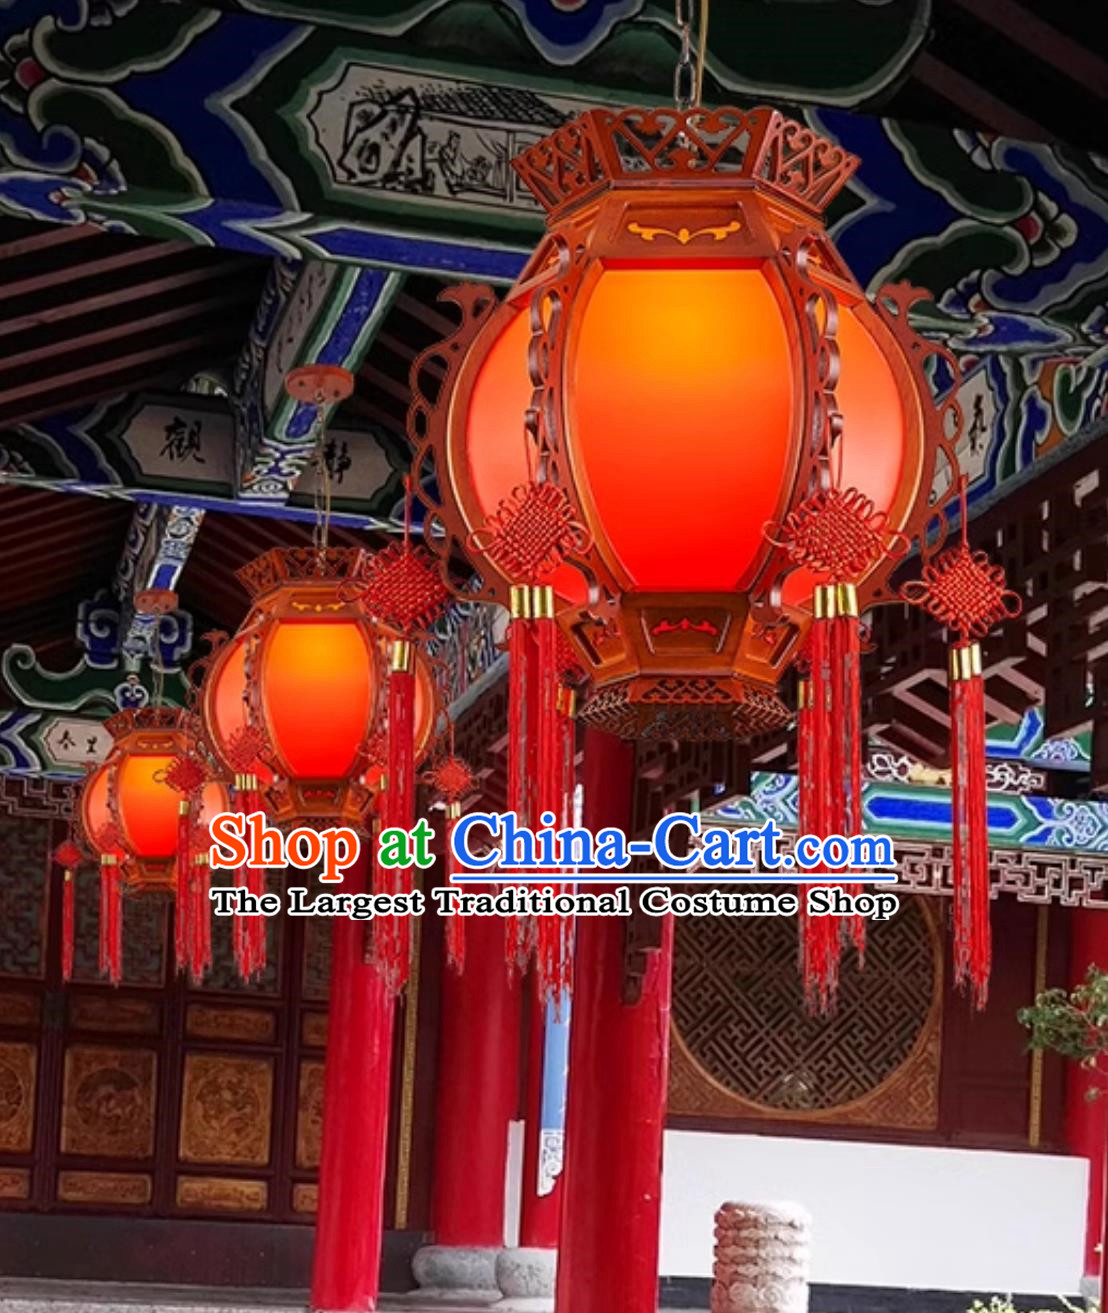 18 Inches Diameter Chinese Lantern Classical Palace Lantern Red Festive Housewarming Balcony Light Solid Wood Corridor Aisle Courtyard Door Chandelier